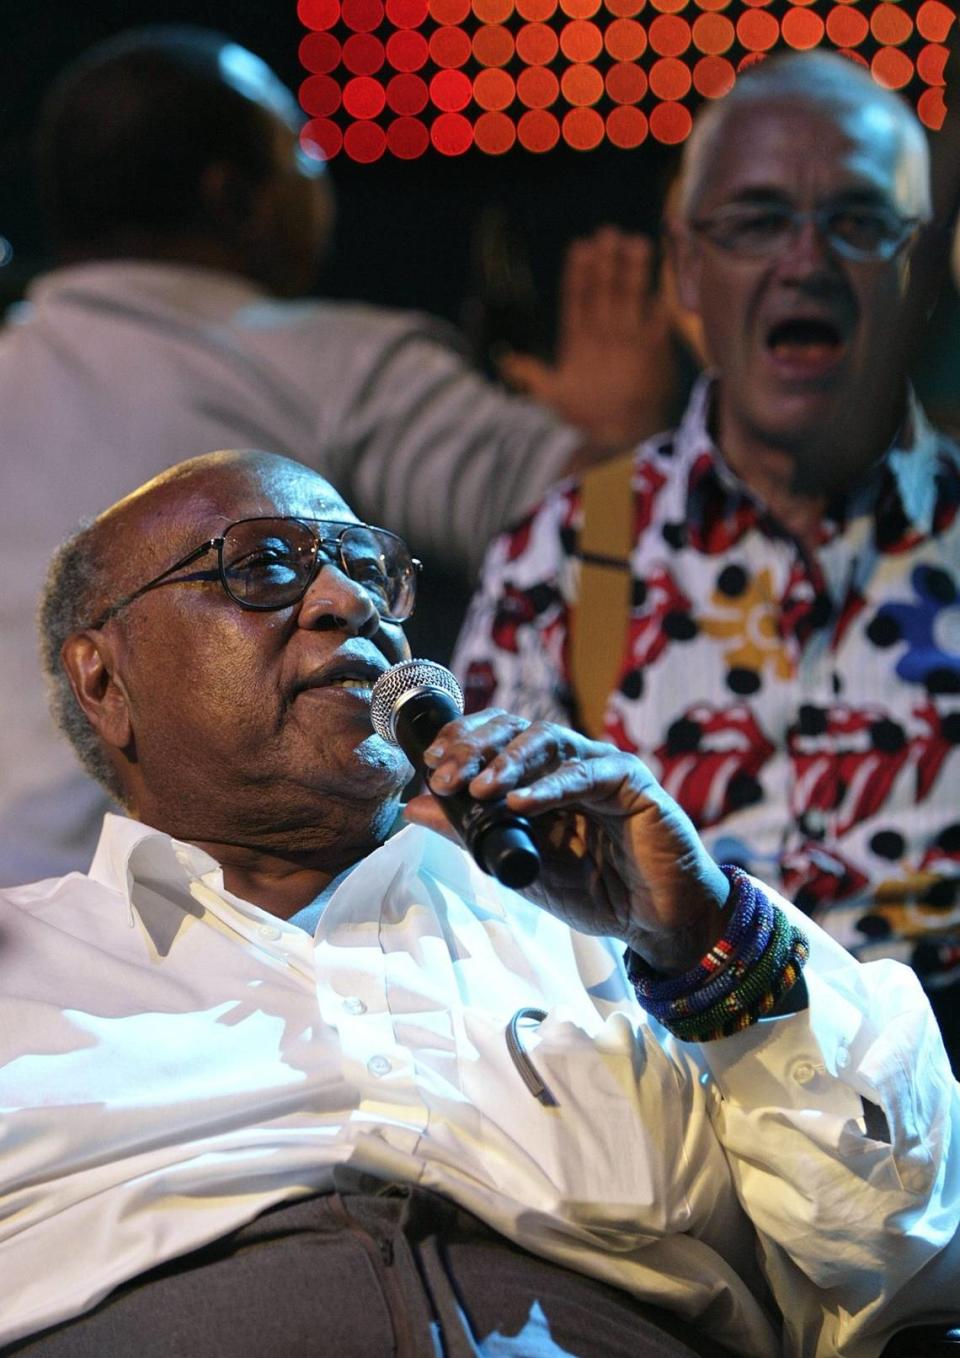 US jazz and soul pianist and singer, Les McCann, left, and Montreux Jazz Festival boss Claude Nobs, right, perform on stage during the opening of the 40th Montreux Jazz Festival at the Stravinski Hall in Montreux, Switzerland, Friday, June 30, 2006. McCann, a Lexington native, prolific and influential musician and recording artist who helped found the “soul jazz” genre and became a favorite source for sampling by Dr. Dre, A Tribe Called Quest and other hip-hop performers, died Friday, Dec. 29, 2023. He was 88.